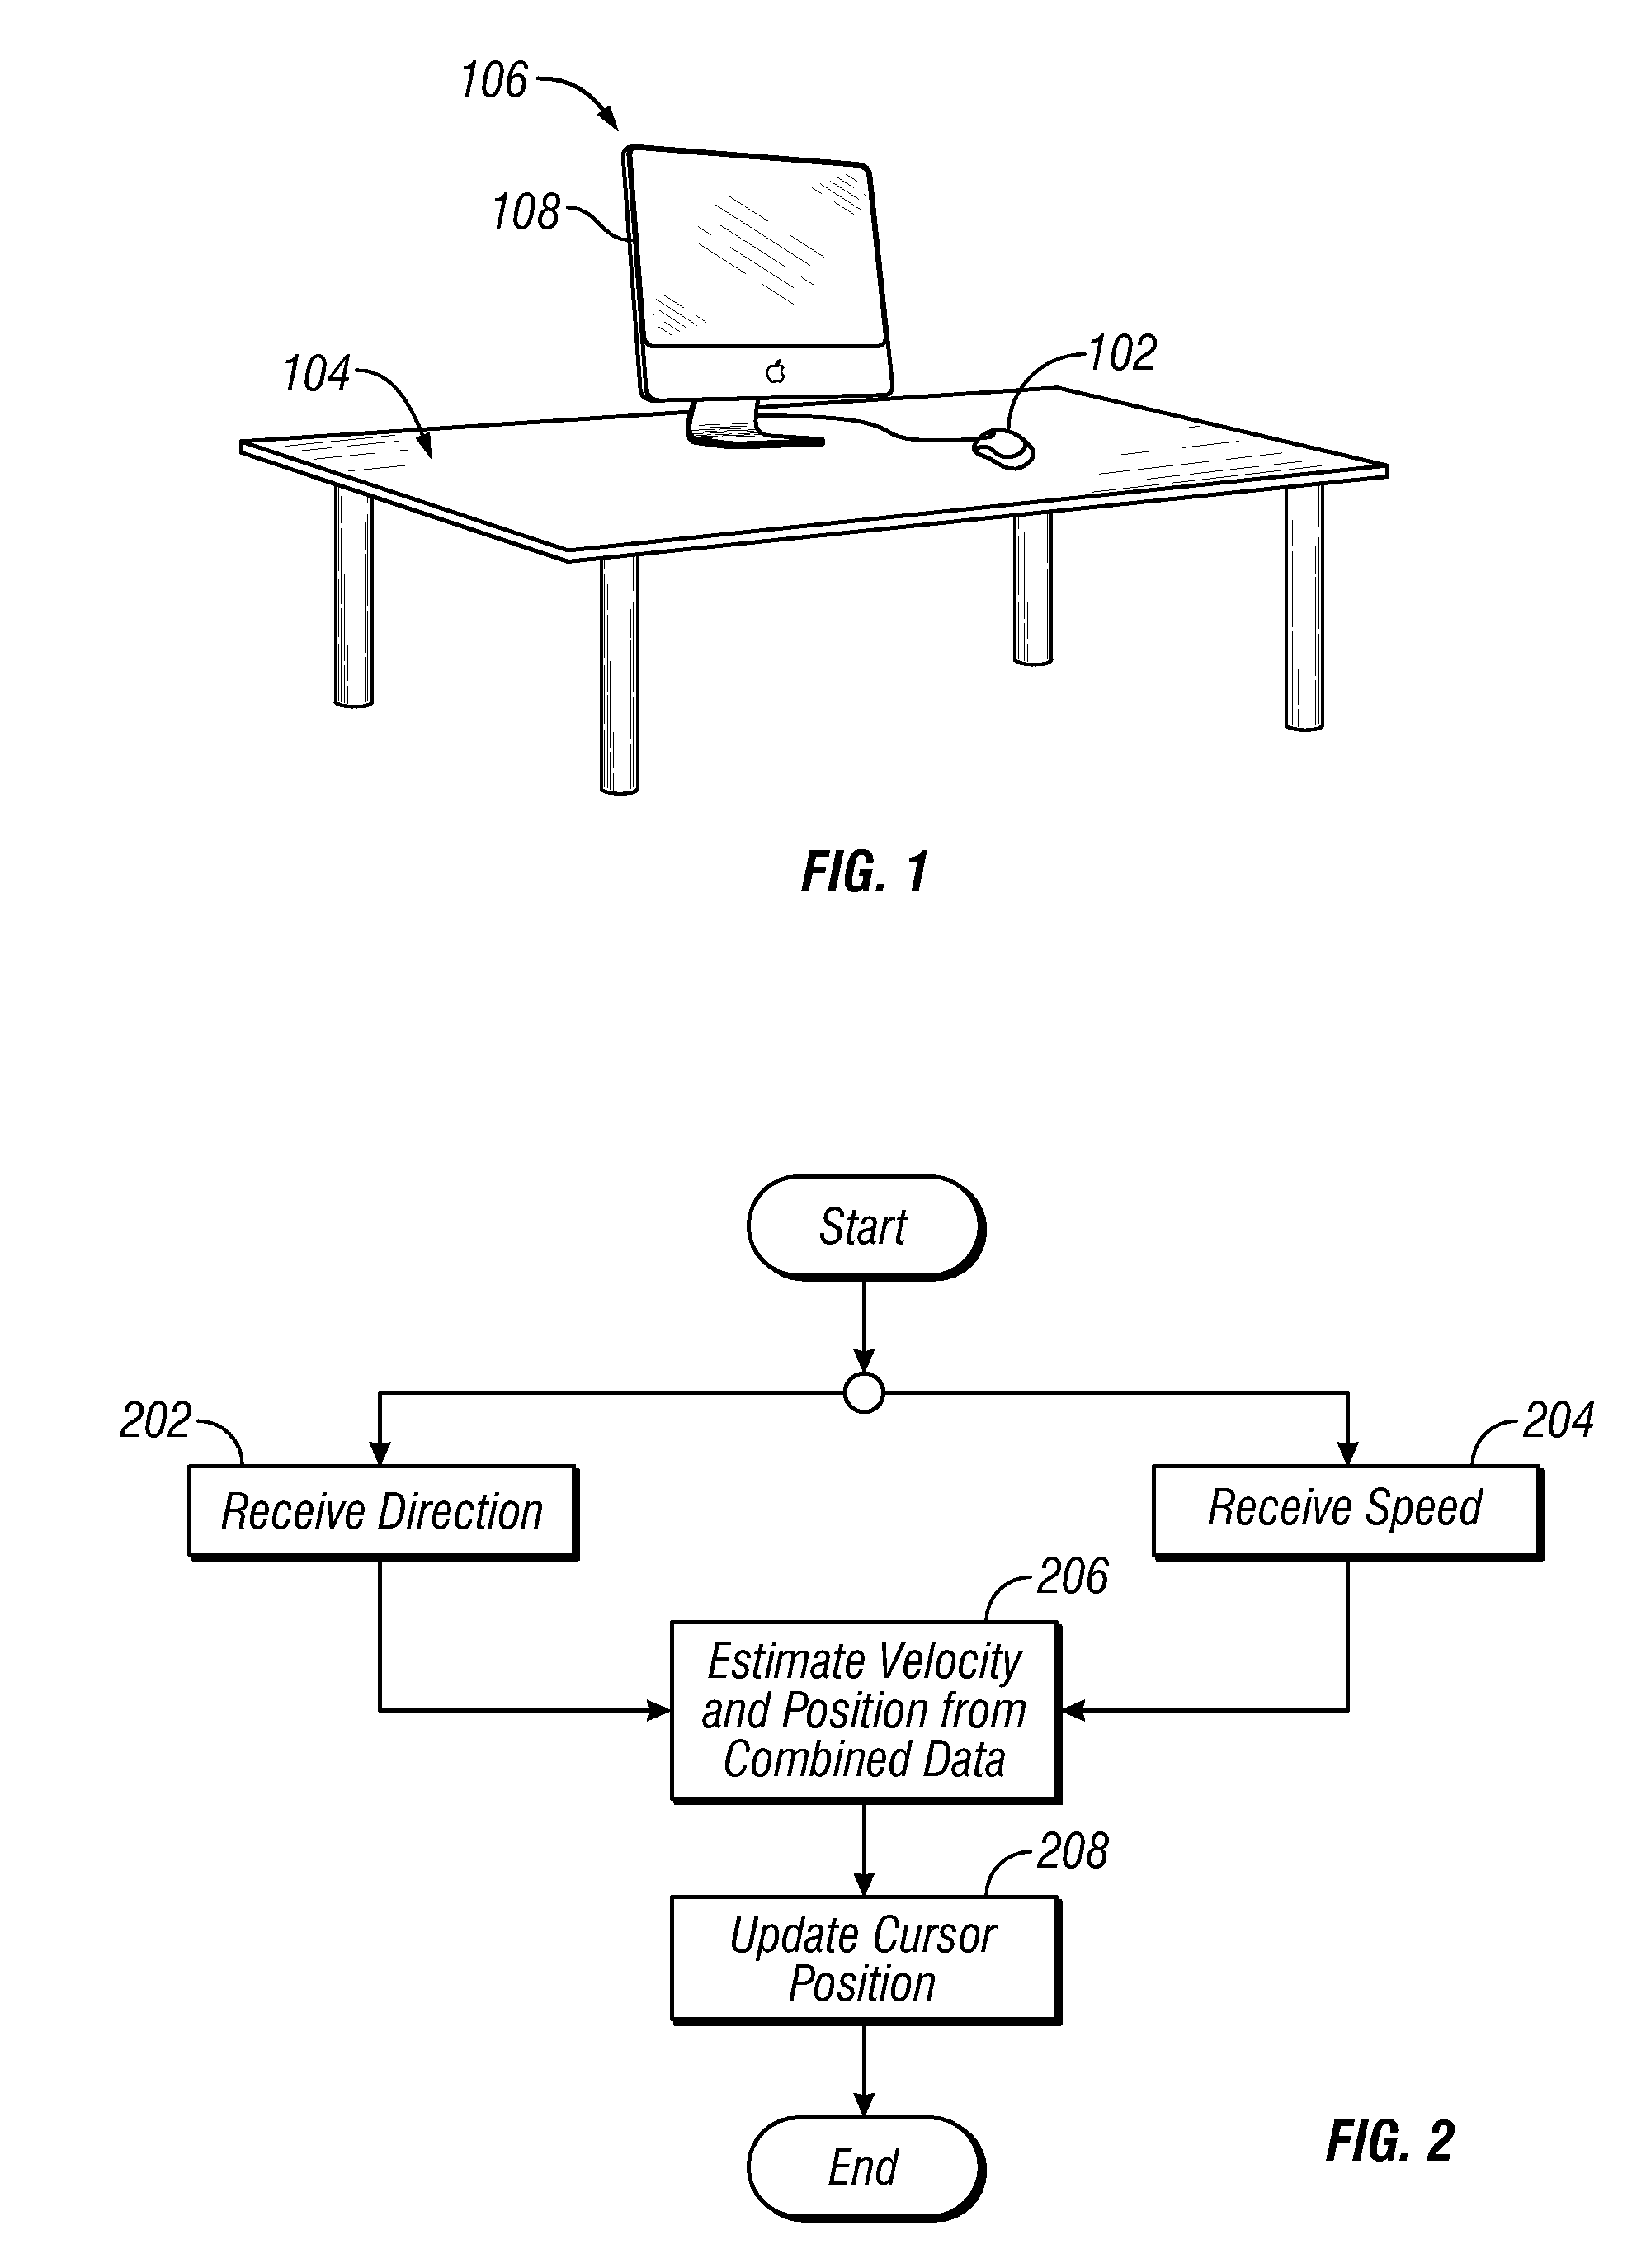 Using vibration to determine the motion of an input device